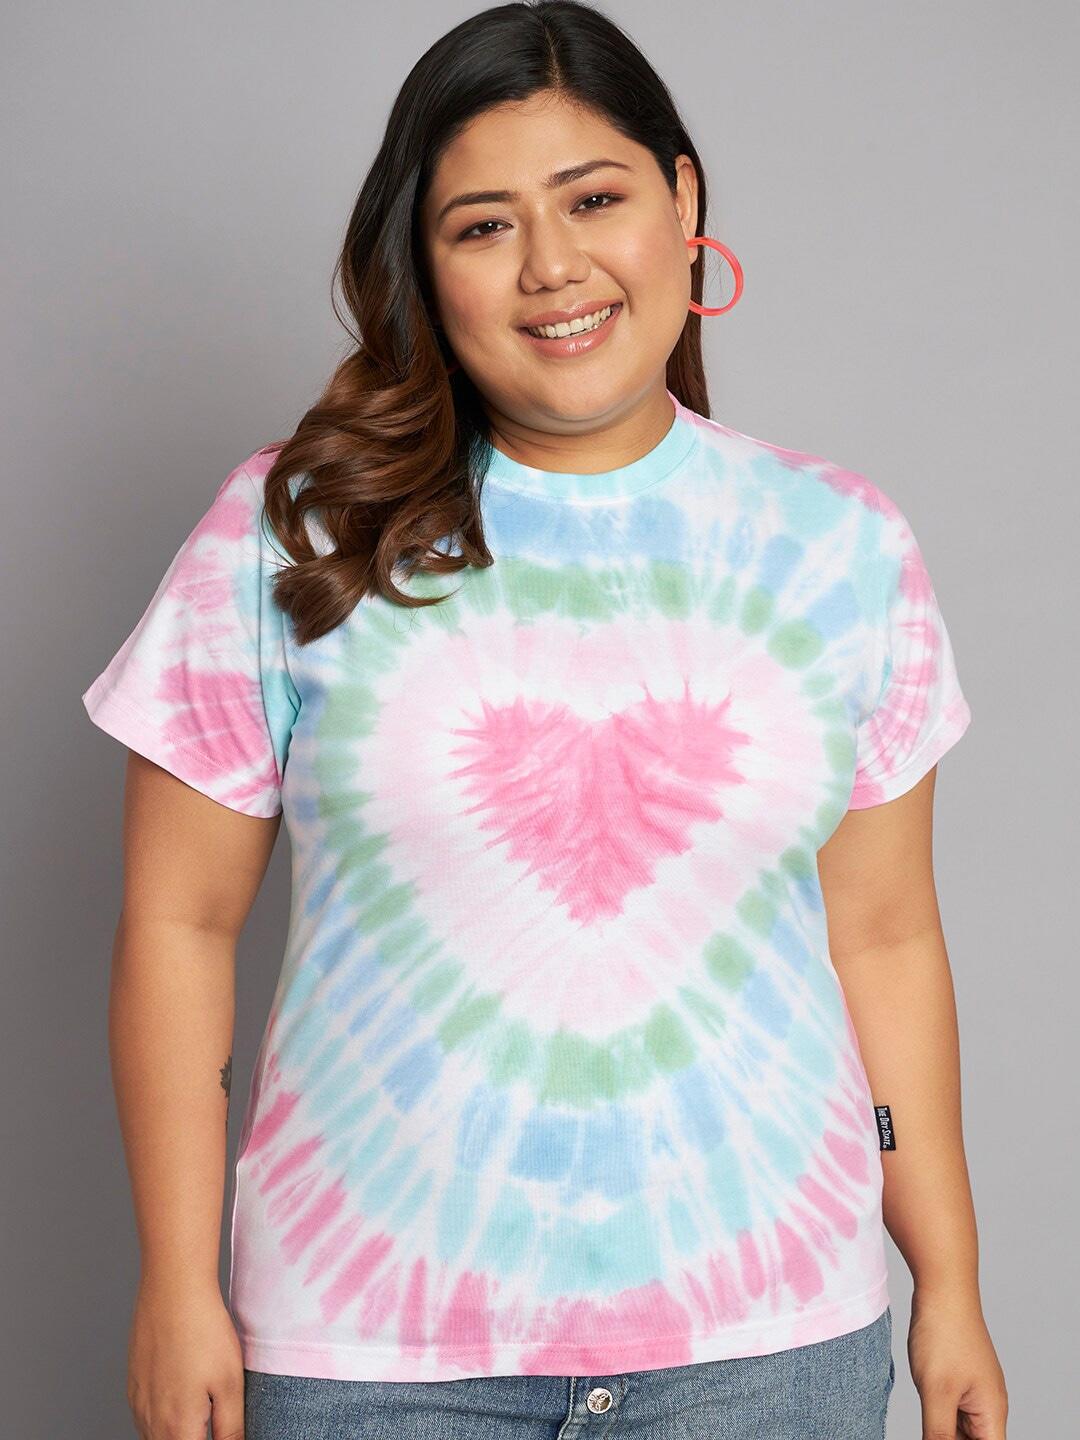 beyound size - the dry state women plus size tie and dyed cotton t-shirt